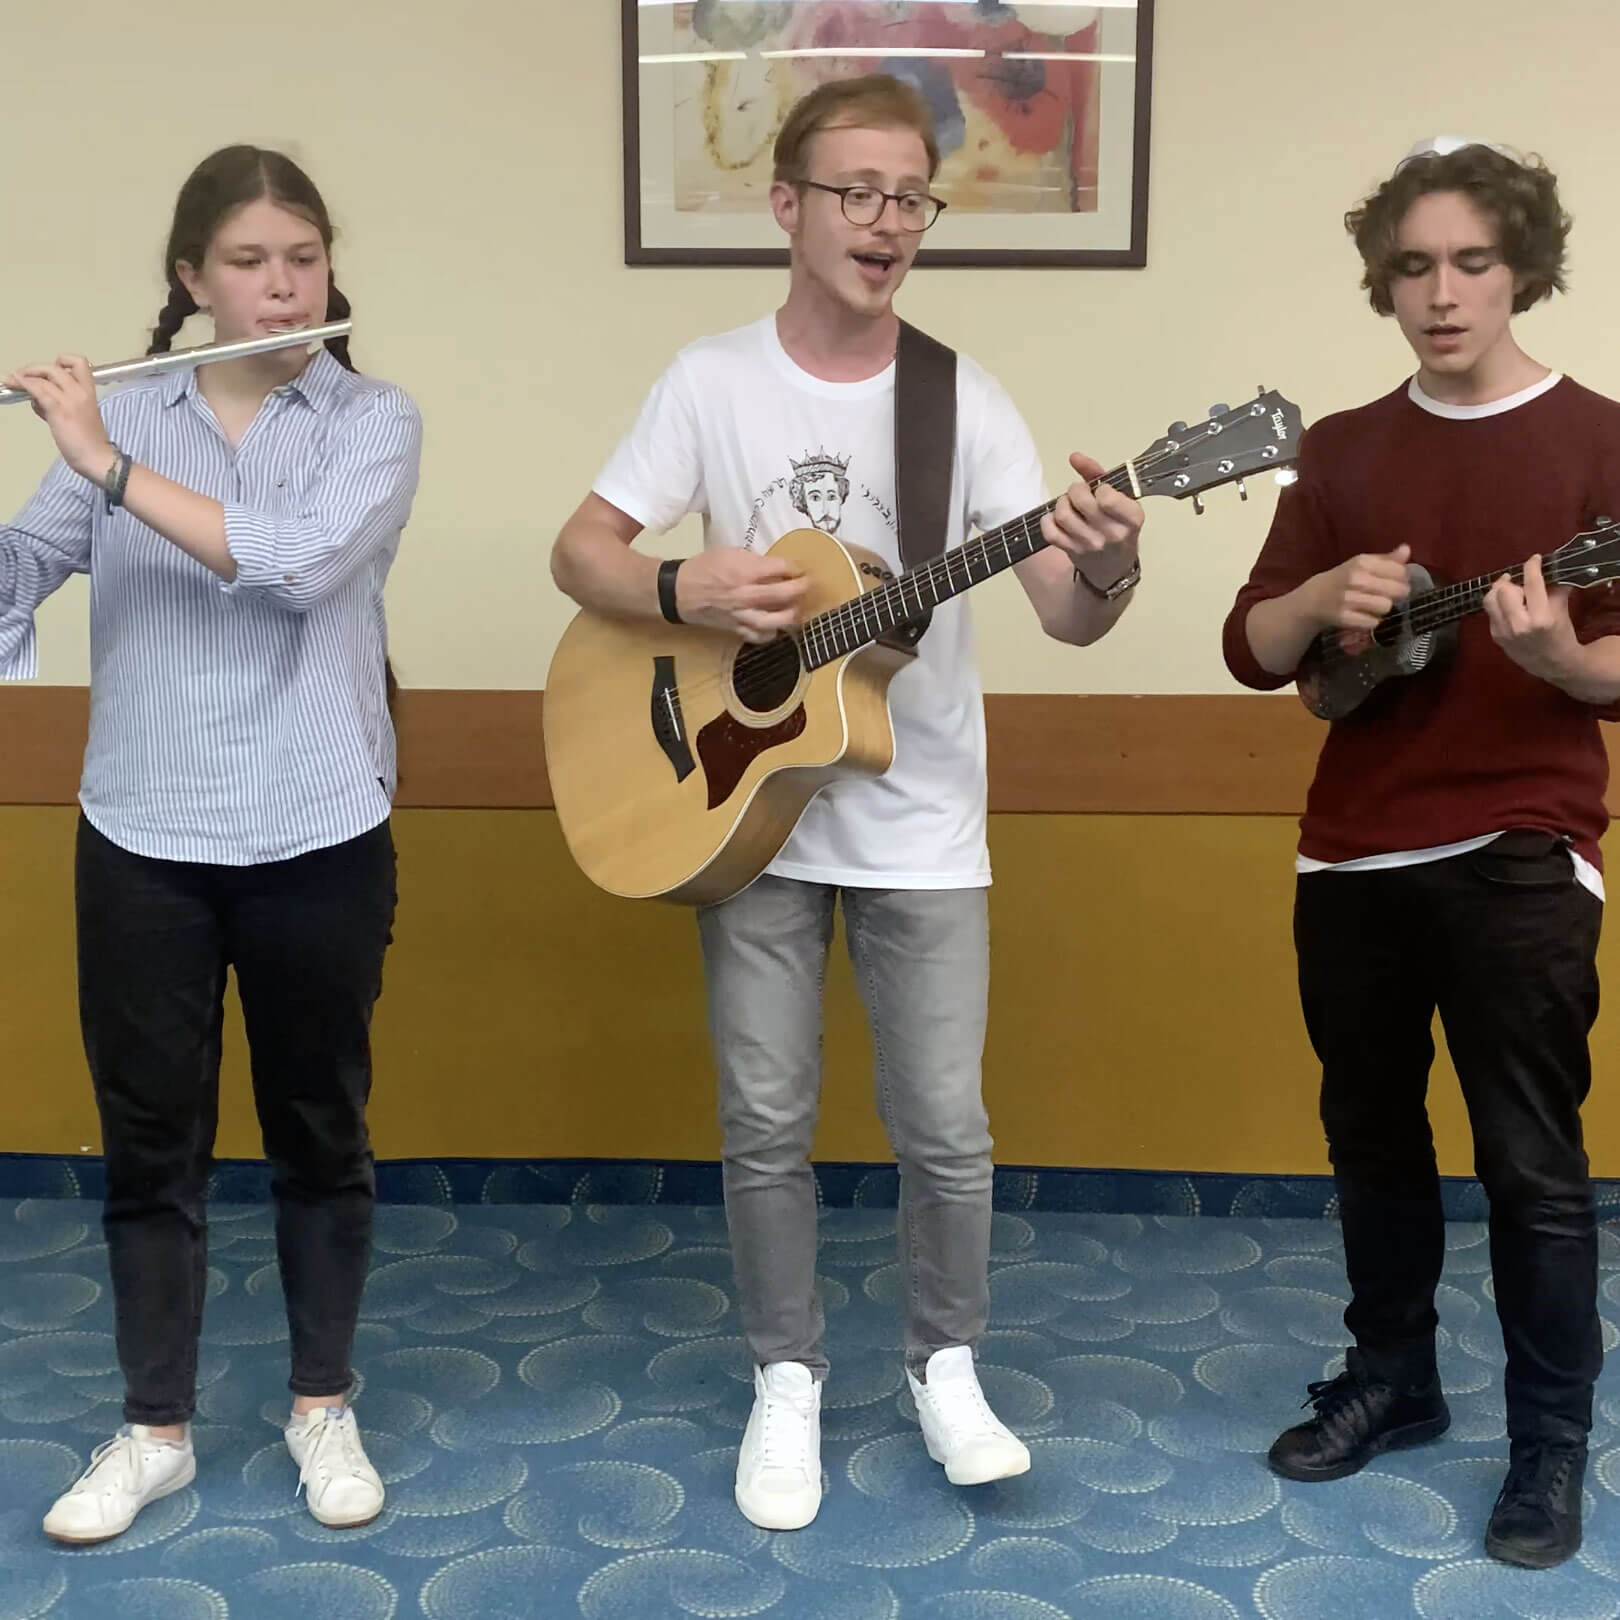 1. Elena Agroskina, 16 y.o. She has a musical degree. An active member and a song leader (the flute) in Moscow Jewish Teen club “Nikitskaya Generation.”
2. Yakov Shamrin (in the center – the guitar), Russia, Moscow
20 y.o., student of PR in Russian Economic University named after G.Plechanov. Program Director and Jewish educator in Moscow Jewish Teen club “Nikitskaya Generation,” a tutor-song leader, Jewish singer.

3. Daniel Drabkin, 16 y.o. a student in a Jewish school, has a musical degree. An active member and a song leader (the ukulele) in Moscow Jewish Teen club “Nikitskaya Generation.”